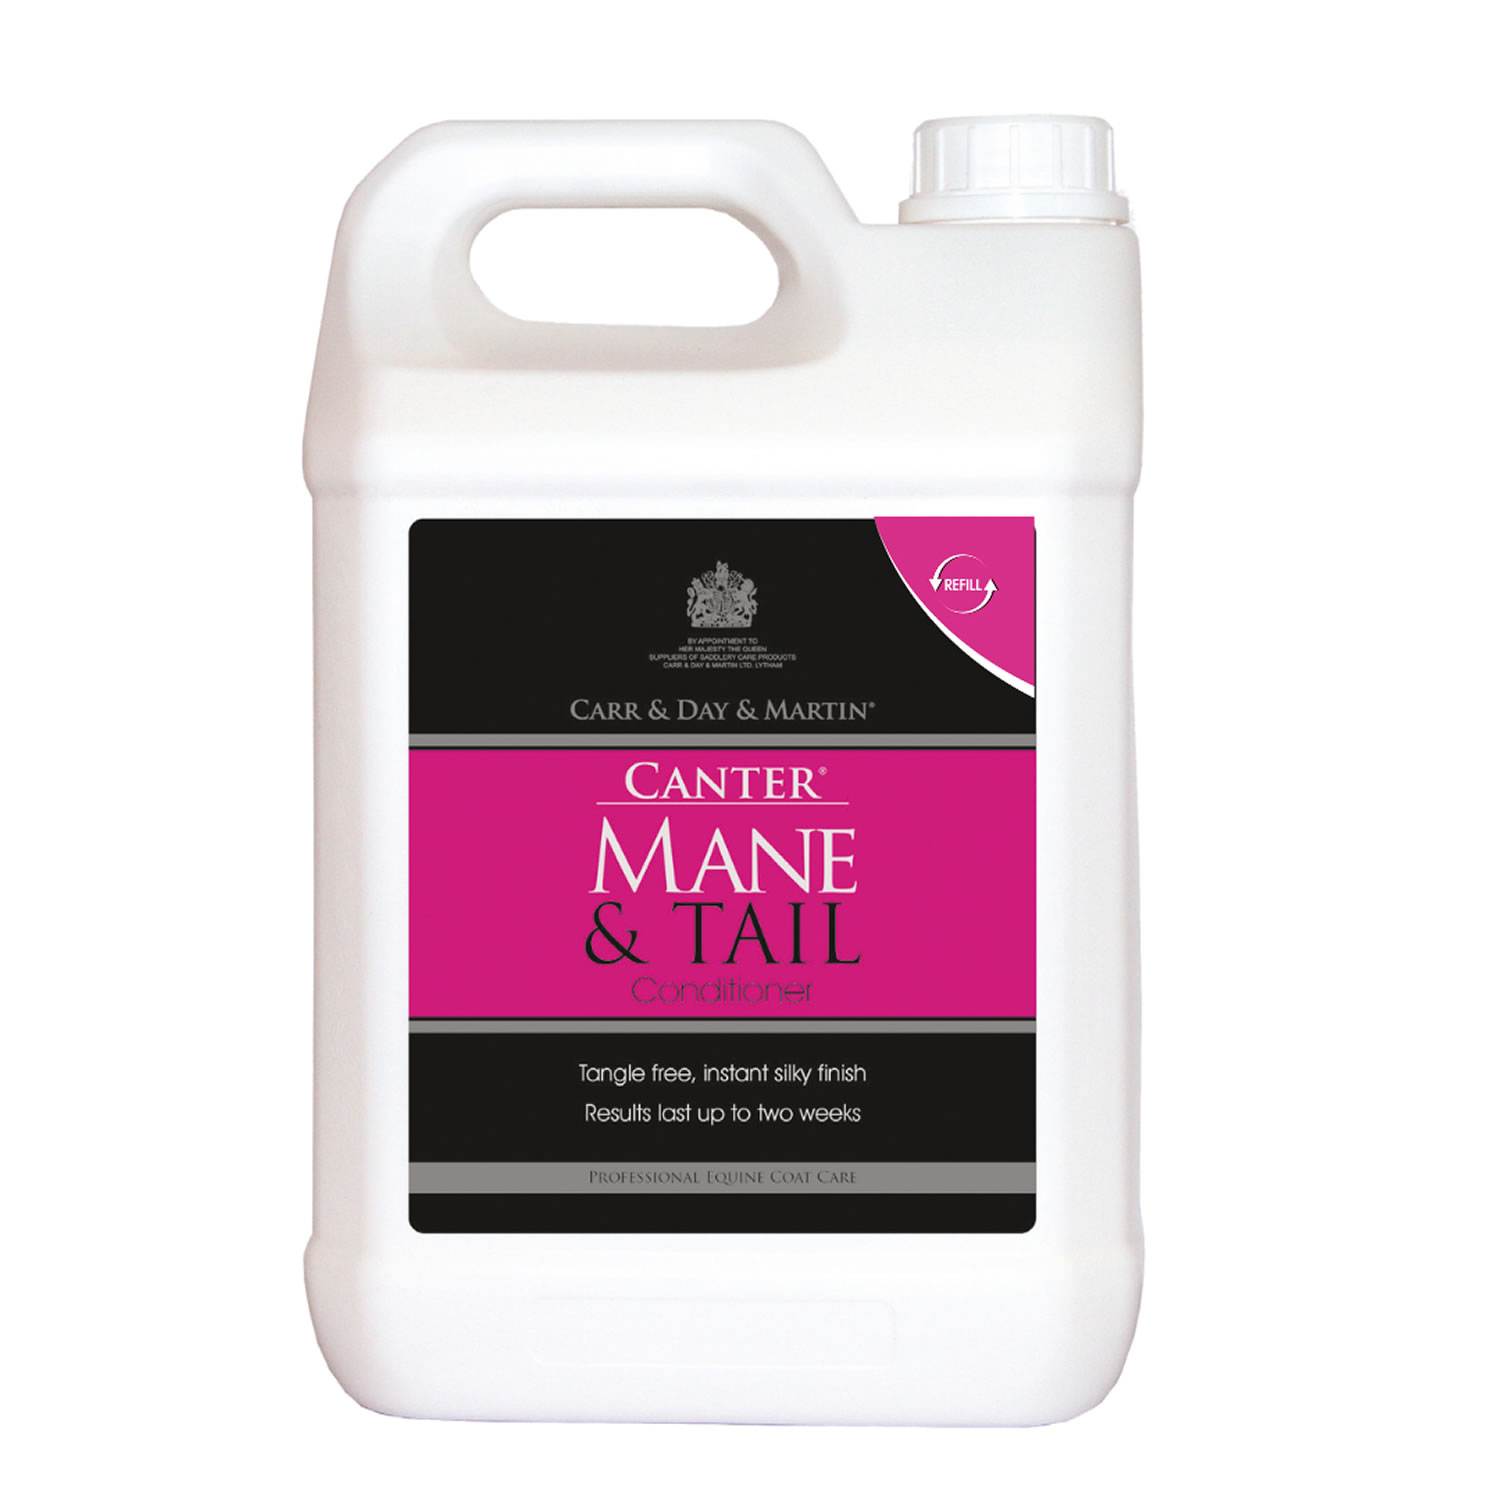 CARR & DAY & MARTIN CANTER MANE & TAIL CONDITIONER 2.5 LT 2.5 LT REFILL